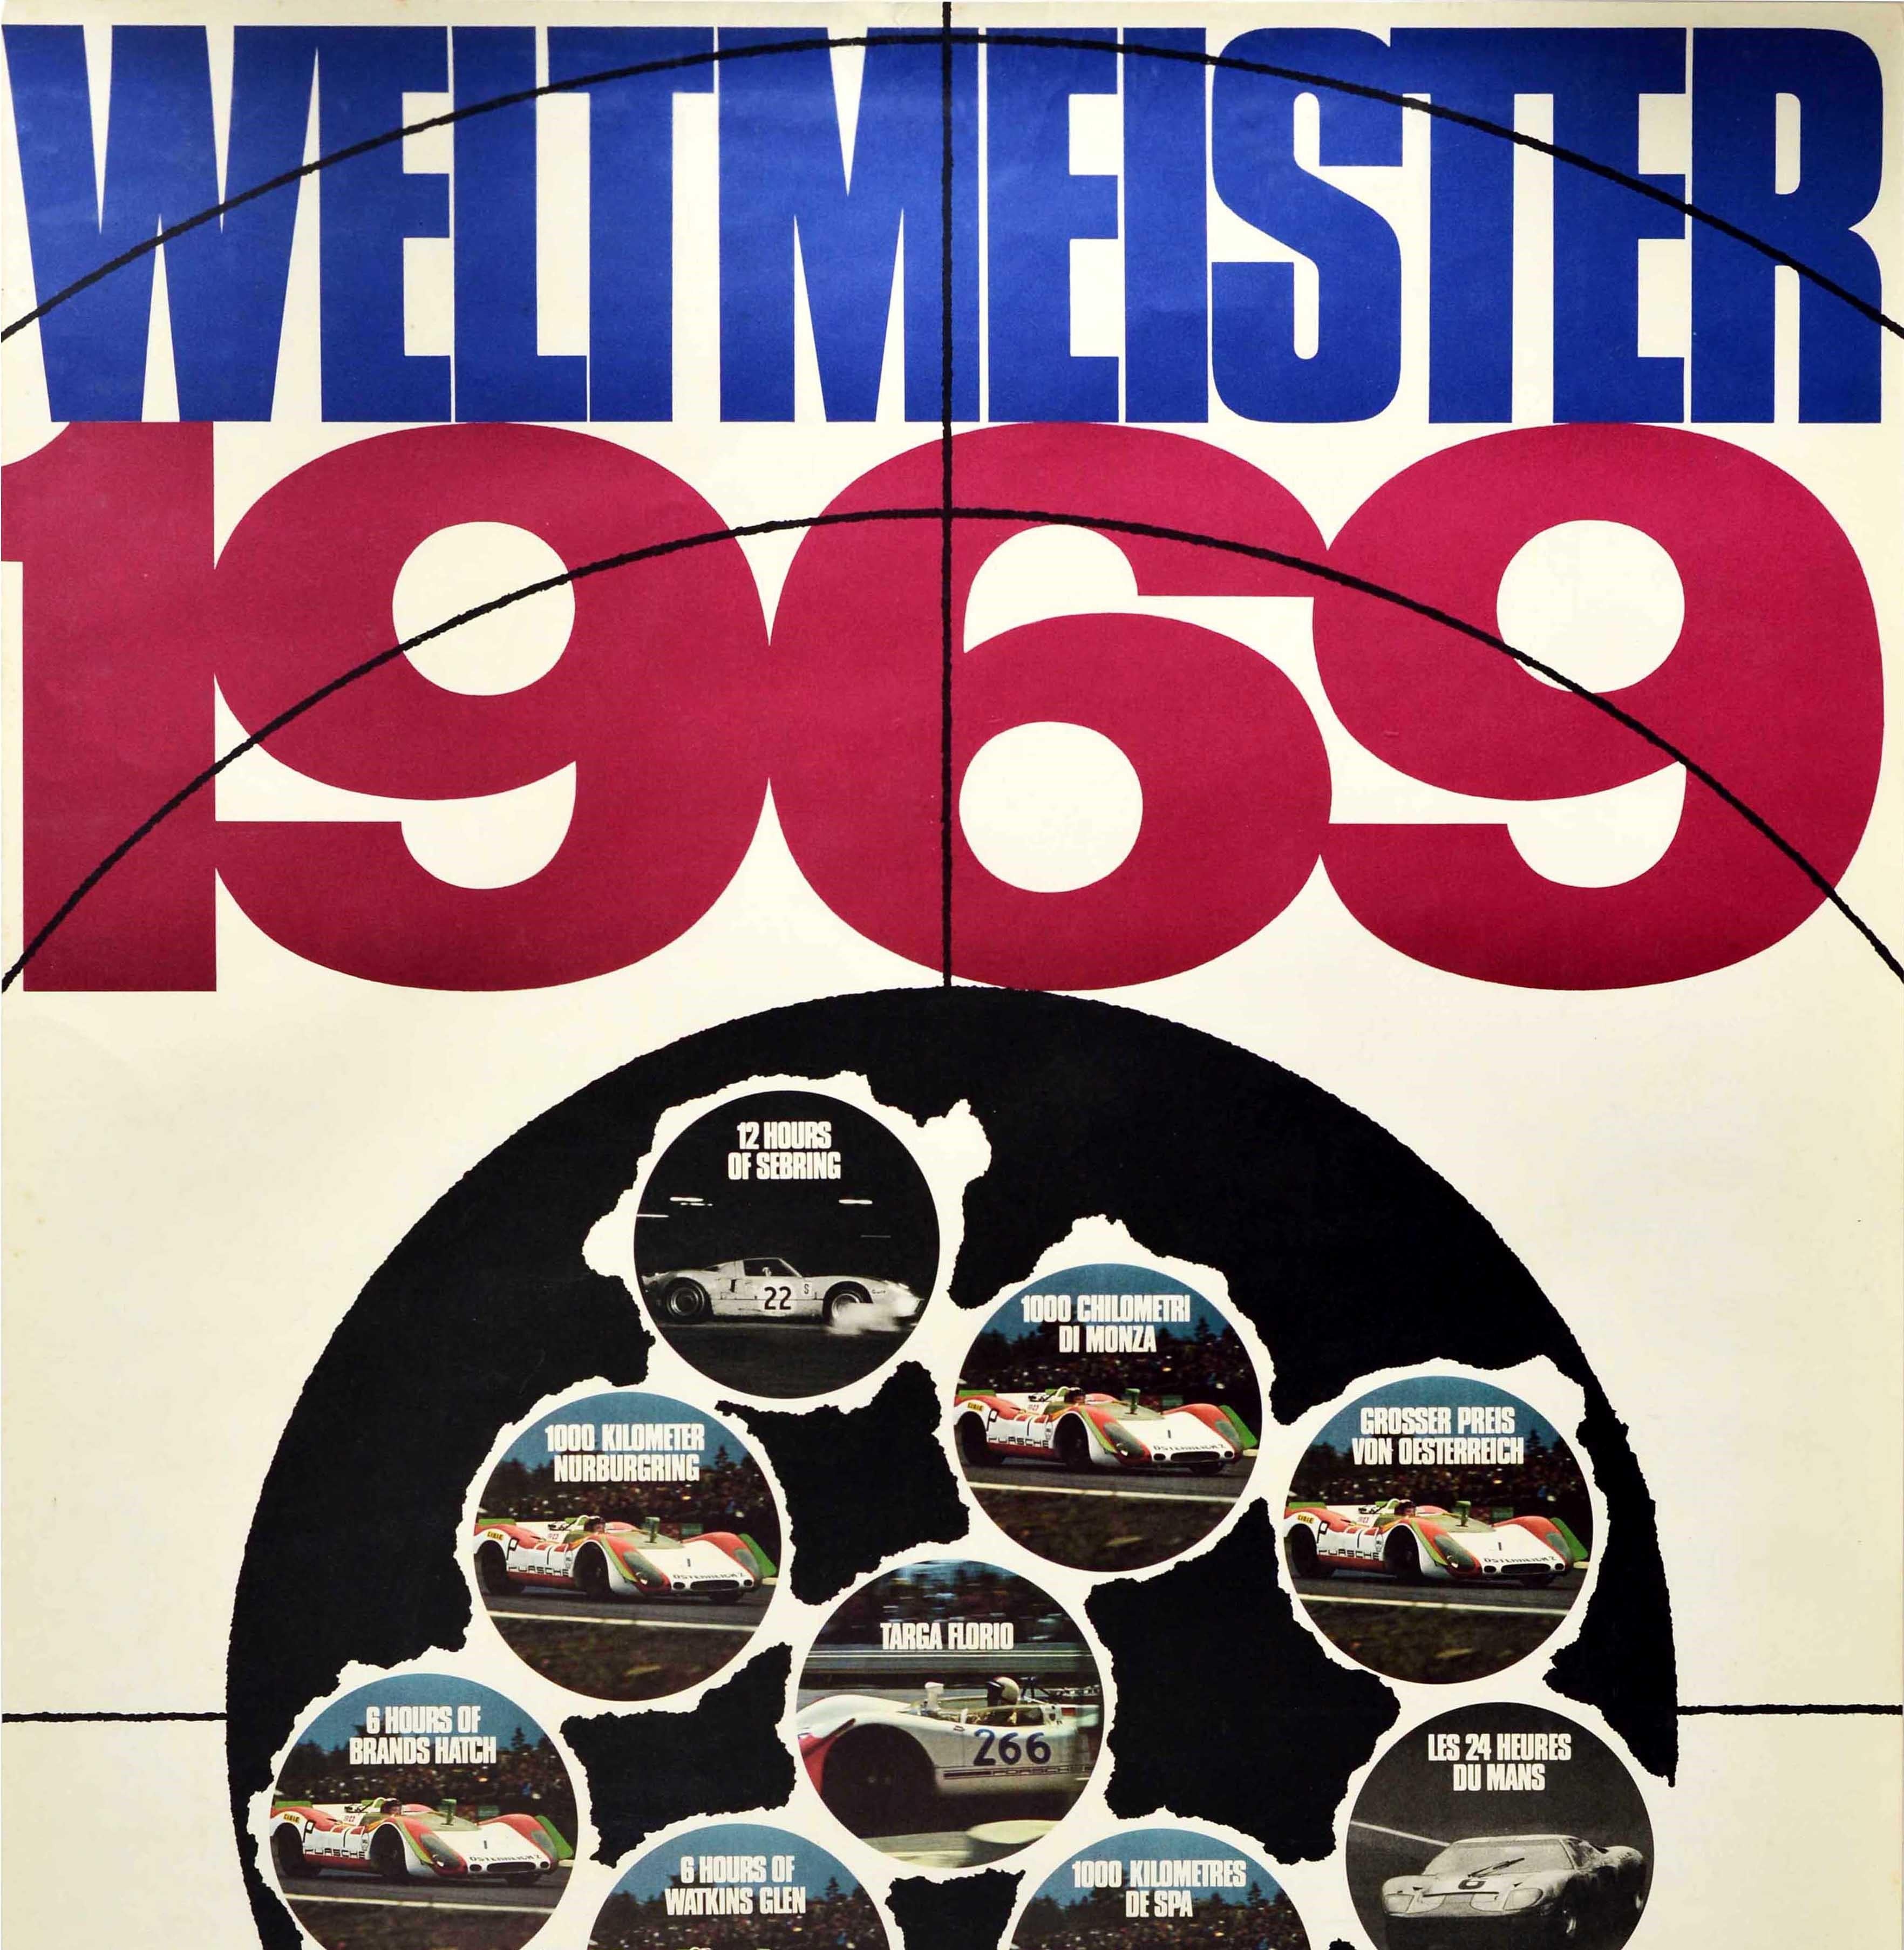 Original vintage motorsport poster for Porsche Champion / Weltmeister 1969 celebrating their car racing victories featuring a great design by Erich Strenger (1922-1993) resembling a shooting target in a gun range with photos in the gunshot holes